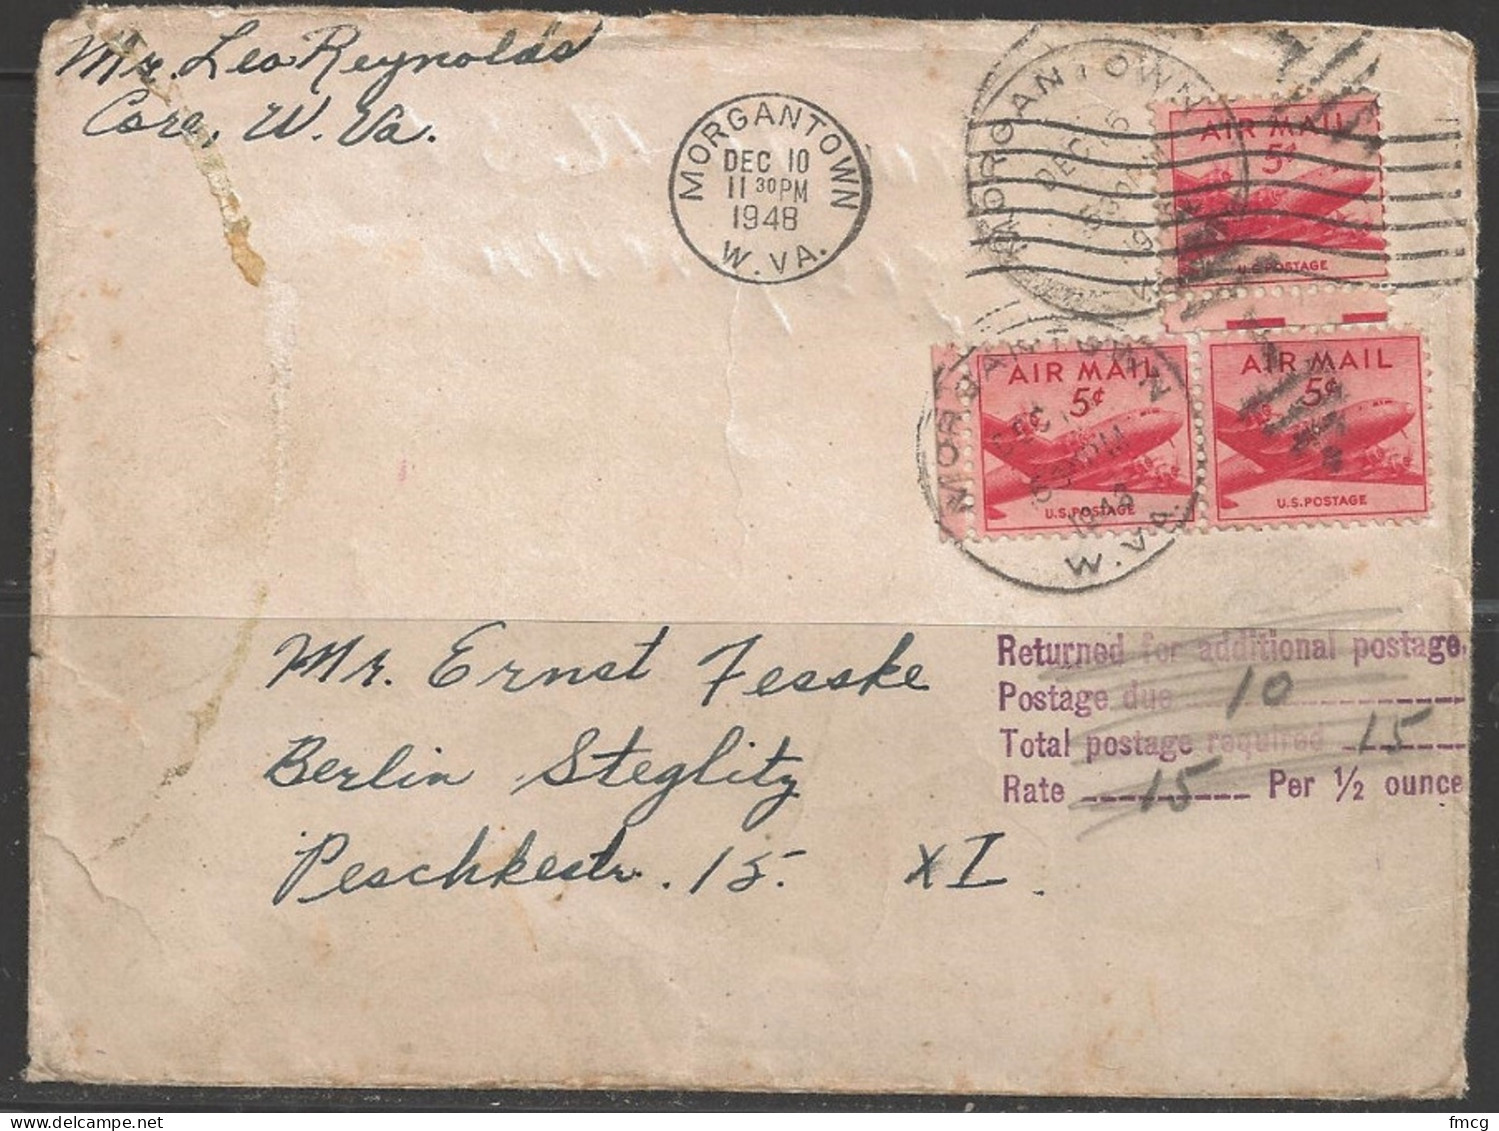 1949 5 Cents Airmail, Additional Postage, Morgantown WVA To Berlin Germany - Storia Postale